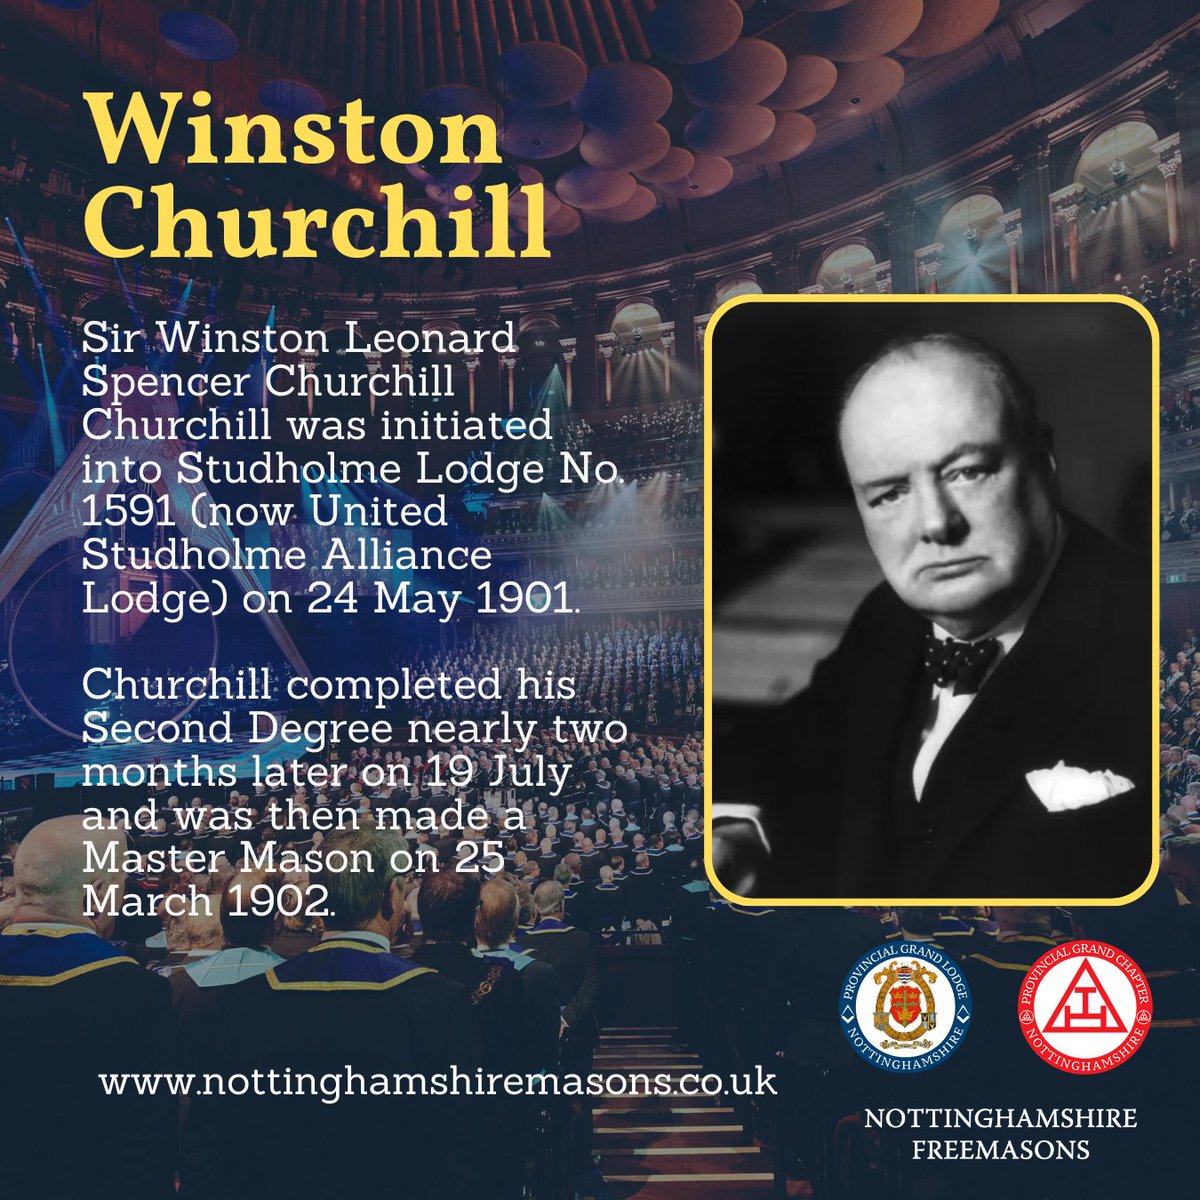 Sir Winston Leonard Spencer Churchill was initiated into Studholme Lodge No. 1591 on 24 May 1901. He completed his Second Degree nearly two months later on 19 July and was then made a Master Mason on 25 March 1902 Learn More and Join us at nottinghamshiremasons.co.uk #Freemasons